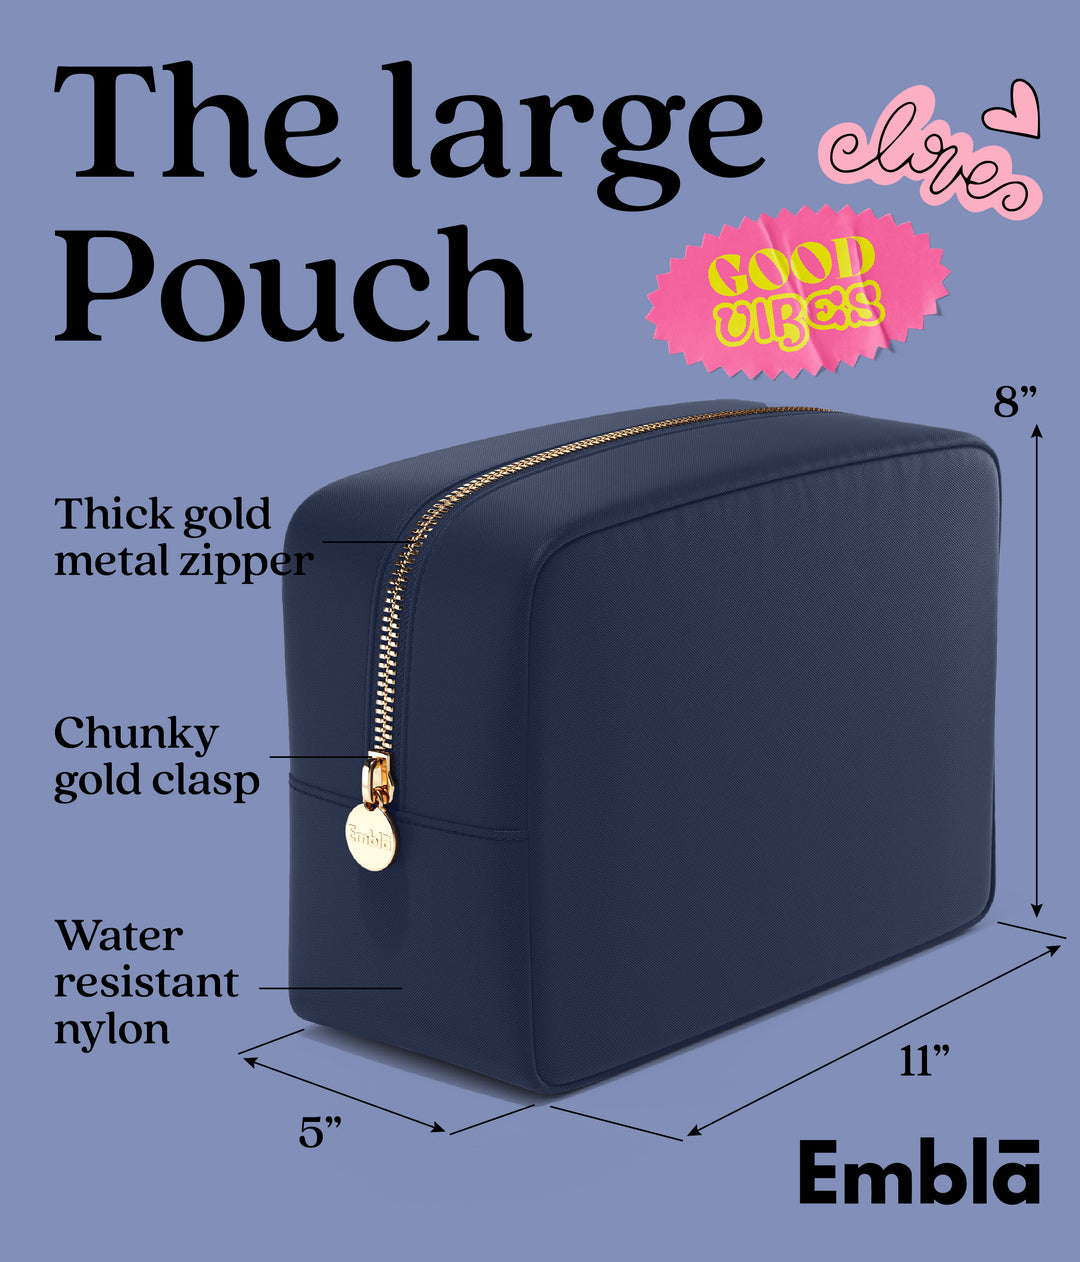 The Large Sapphire Pouch